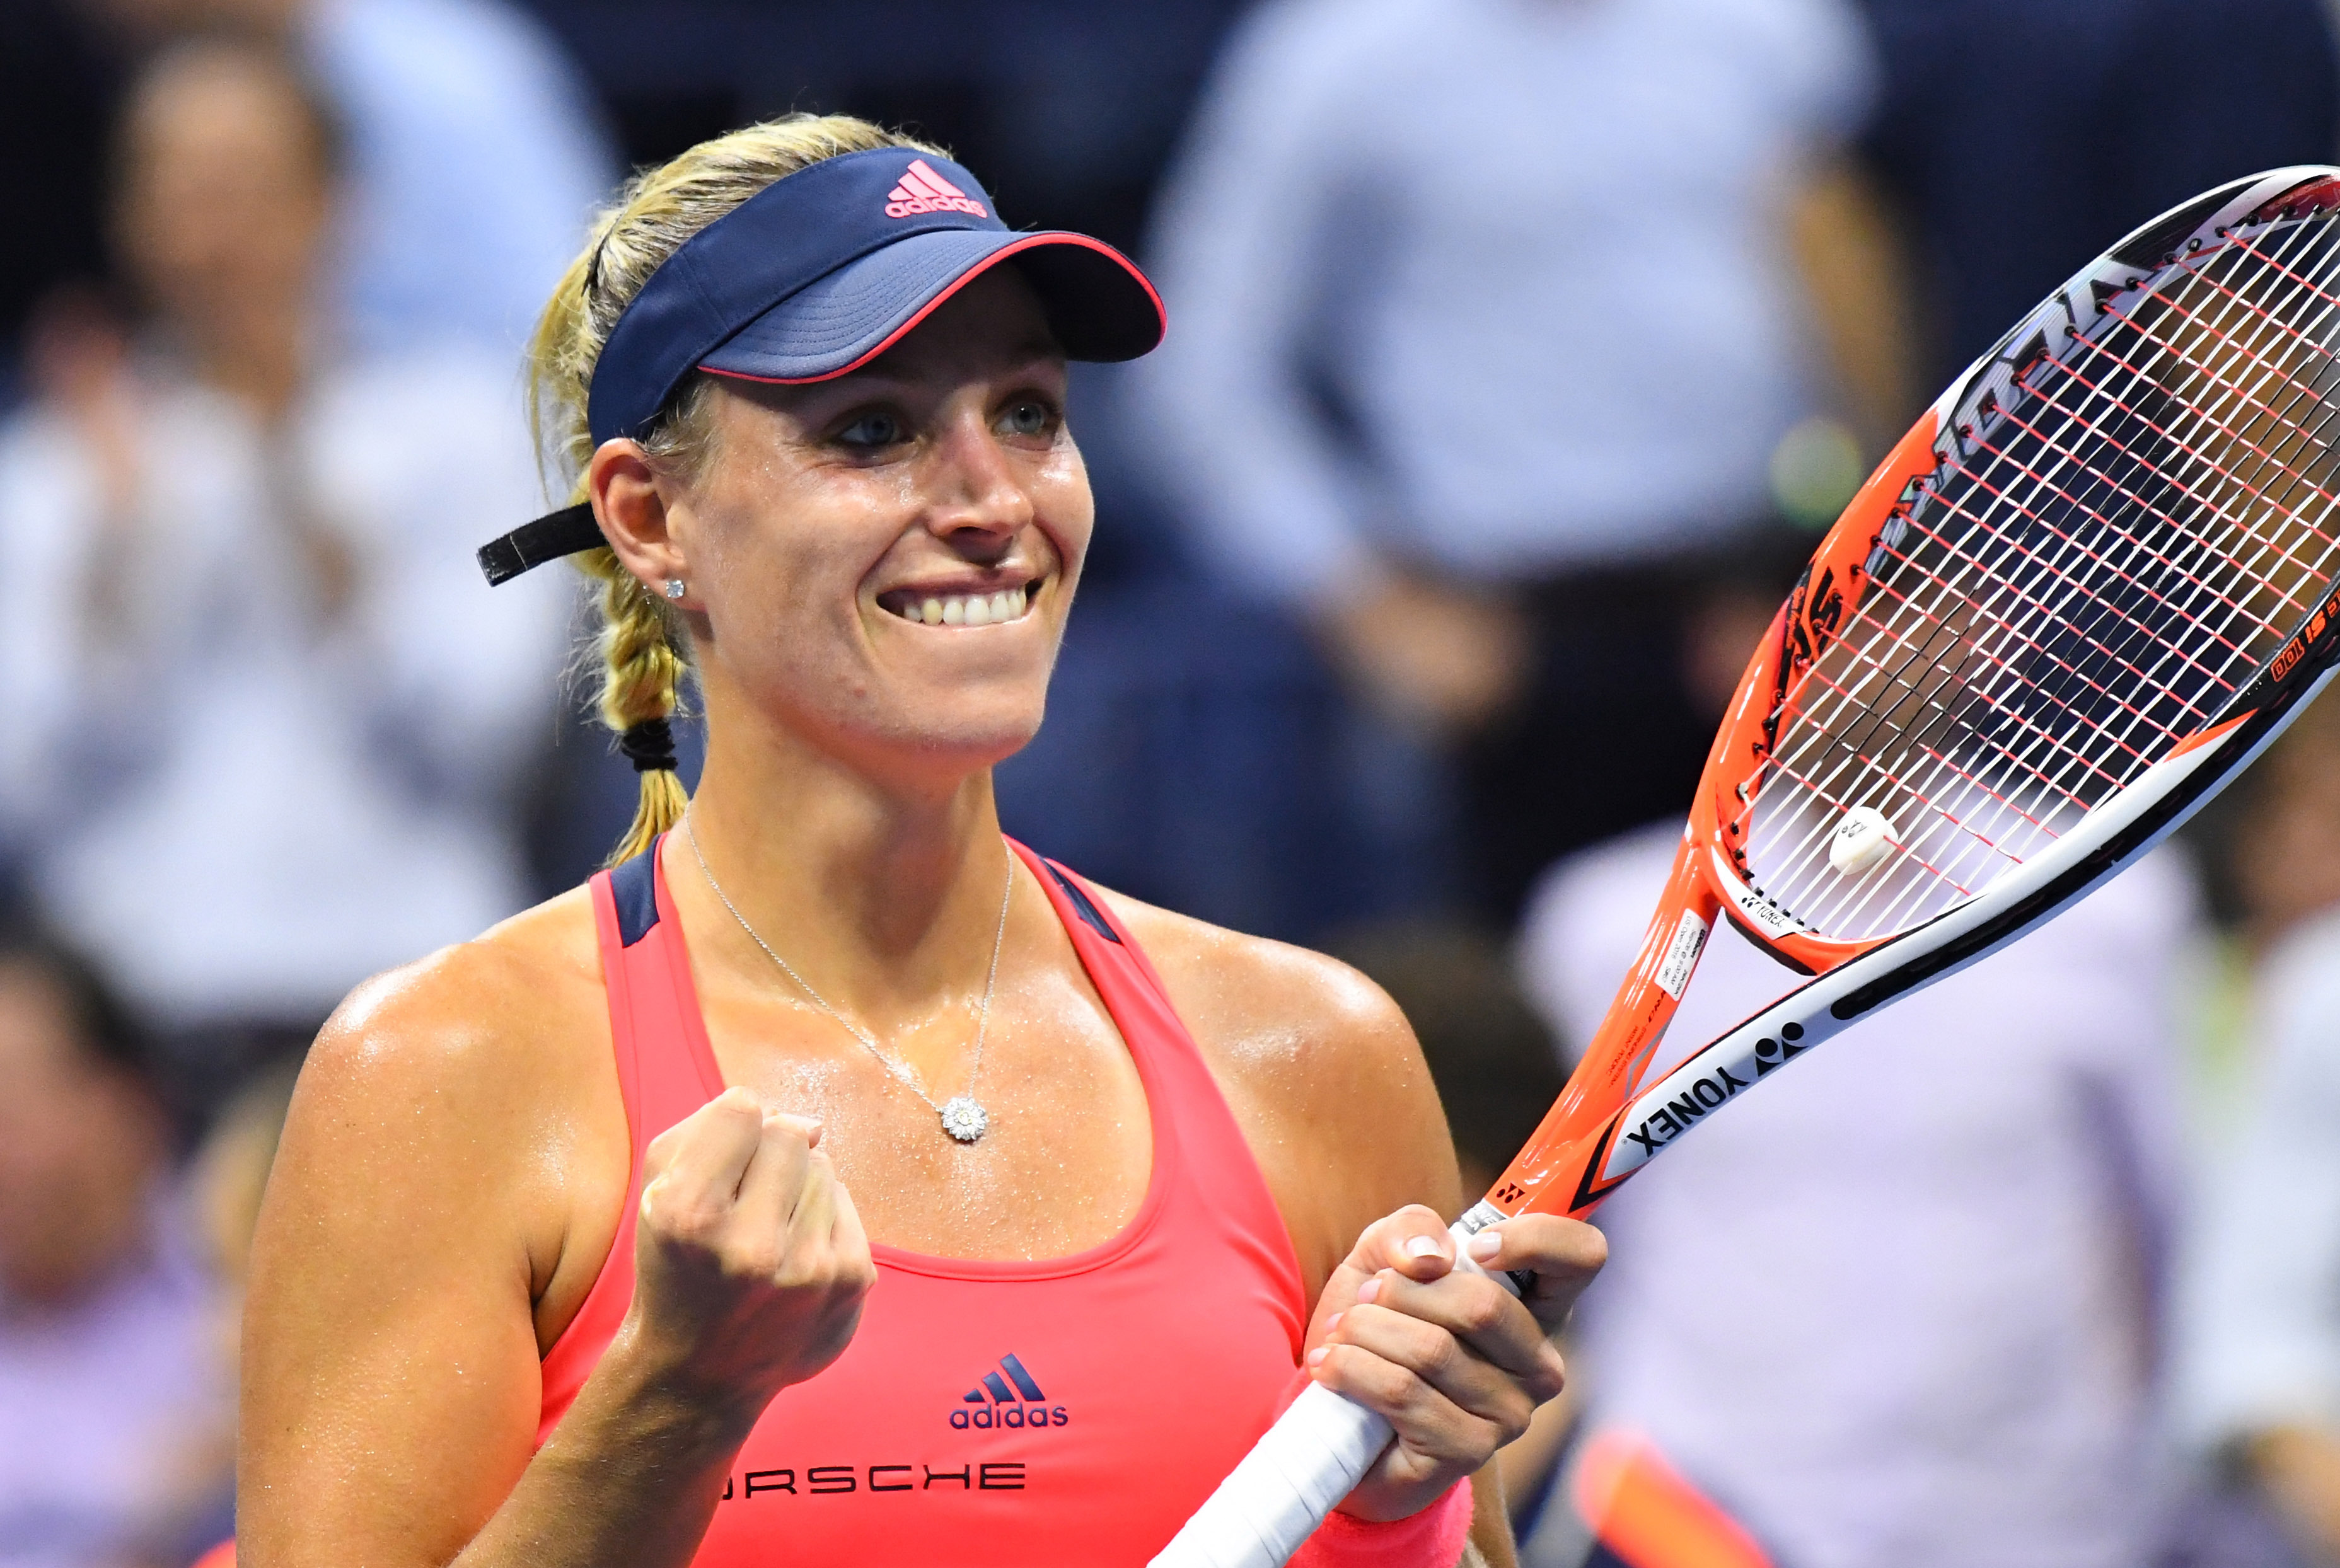 US Open Tennis 2016 Women's Final: TV Schedule, Start Time and Live